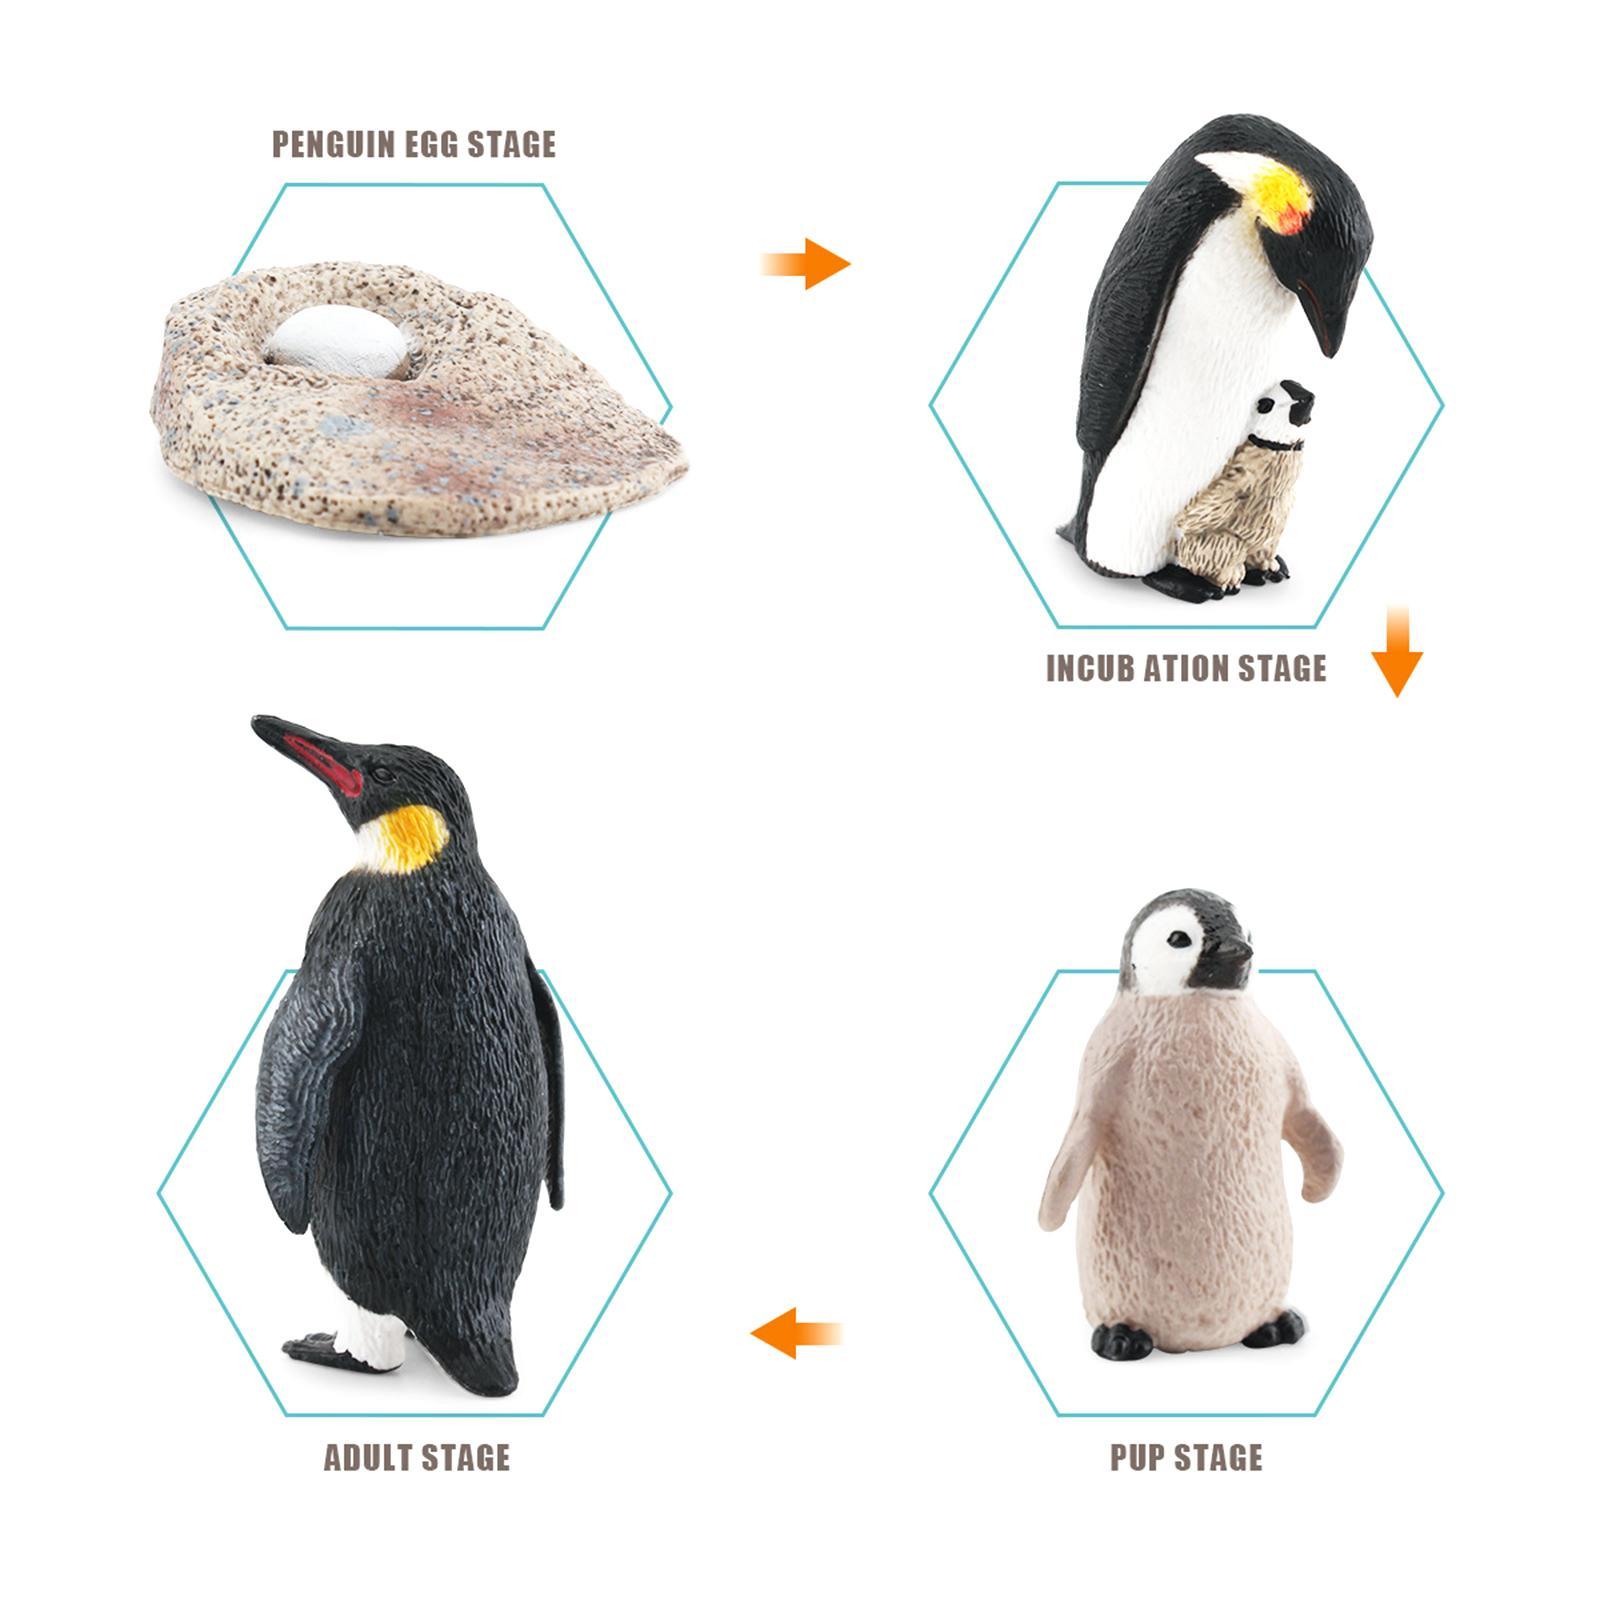 19-penguin-life-cycle-facts